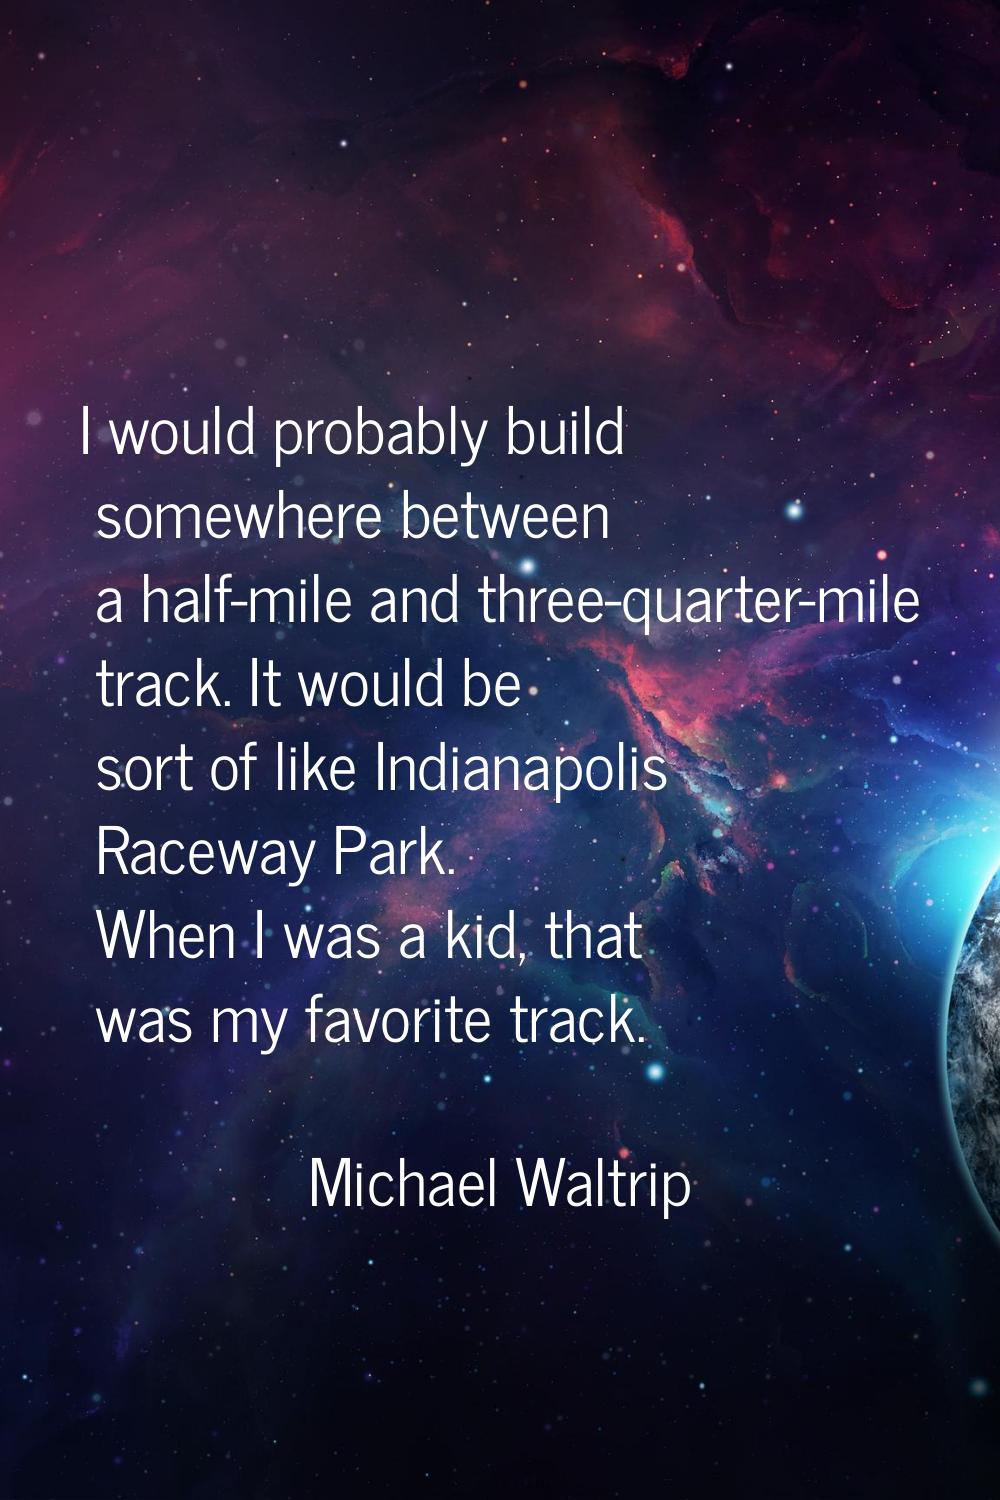 I would probably build somewhere between a half-mile and three-quarter-mile track. It would be sort